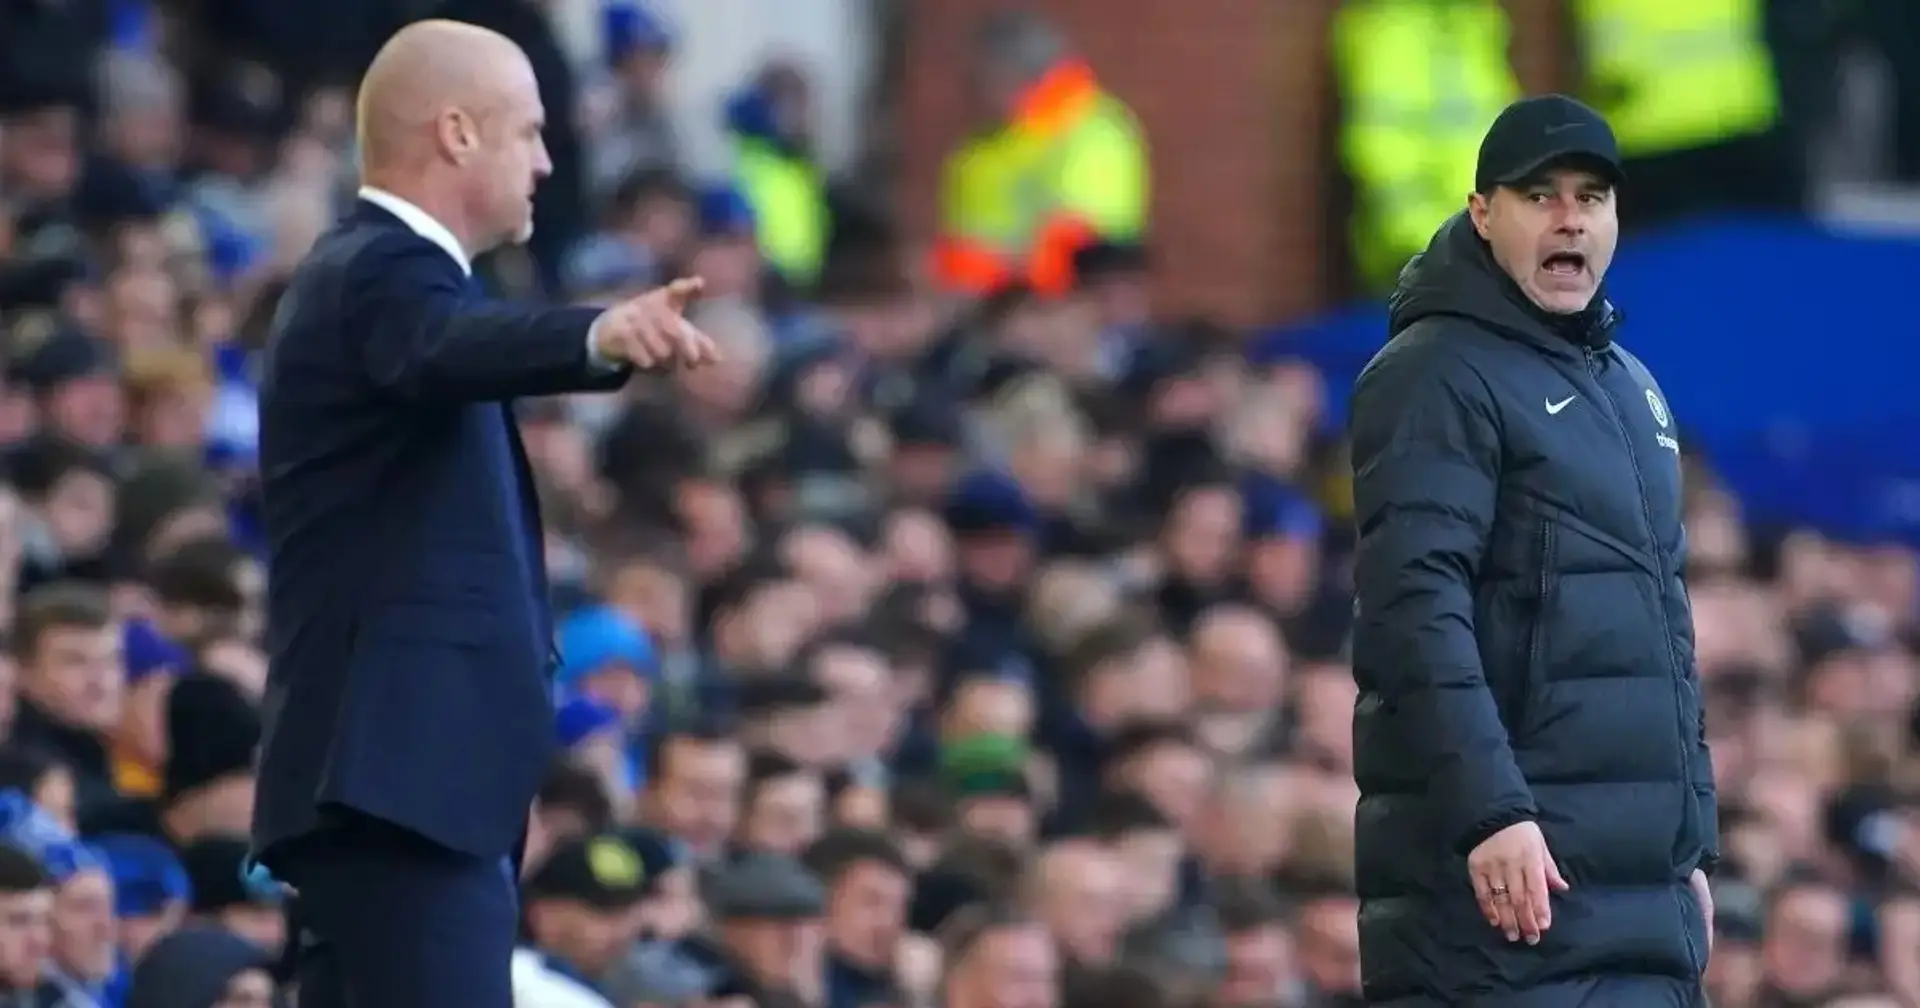 'They've spent a fortune on players': Dyche fires back at Pochettino after Chelsea defeat to Everton